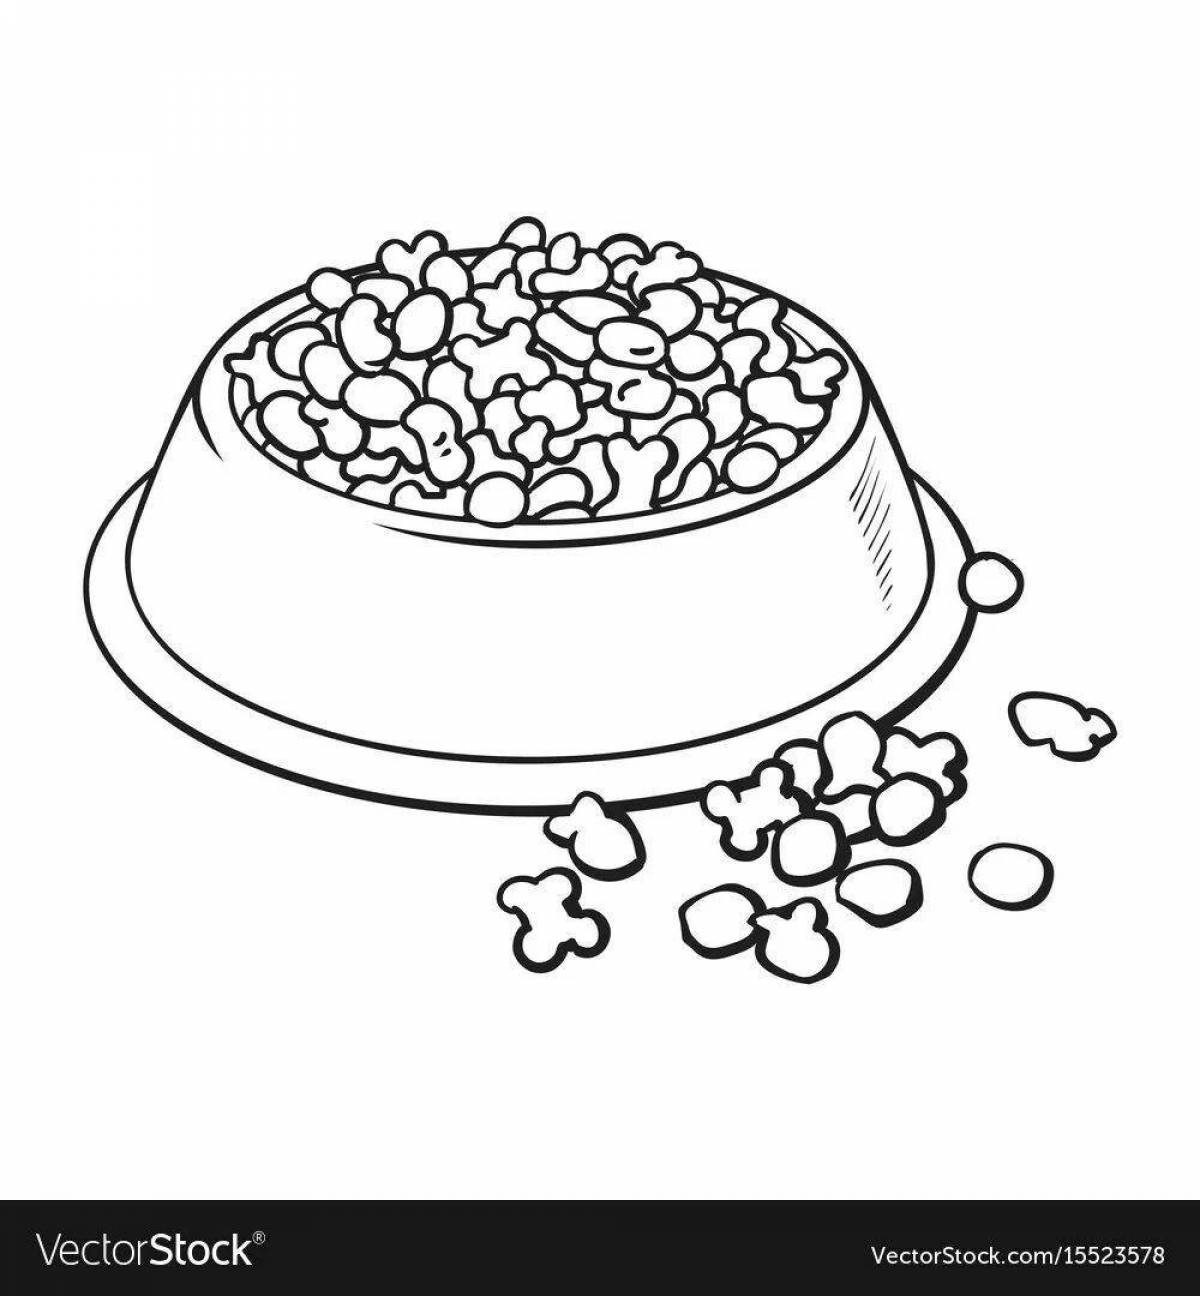 Adorable cat food coloring page